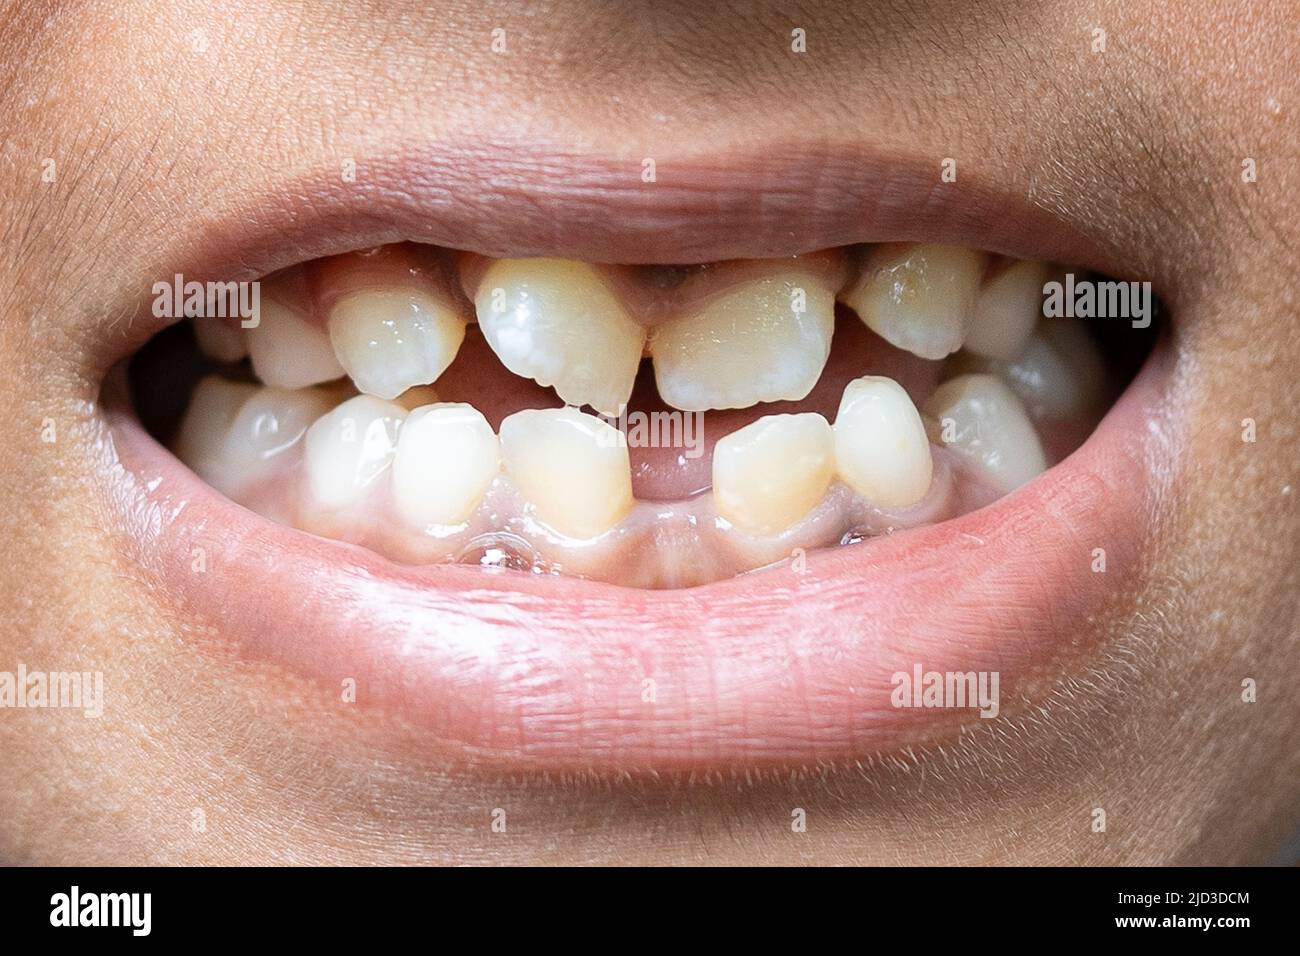 beautiful smile by press ceramic crown and venners Stock Photo